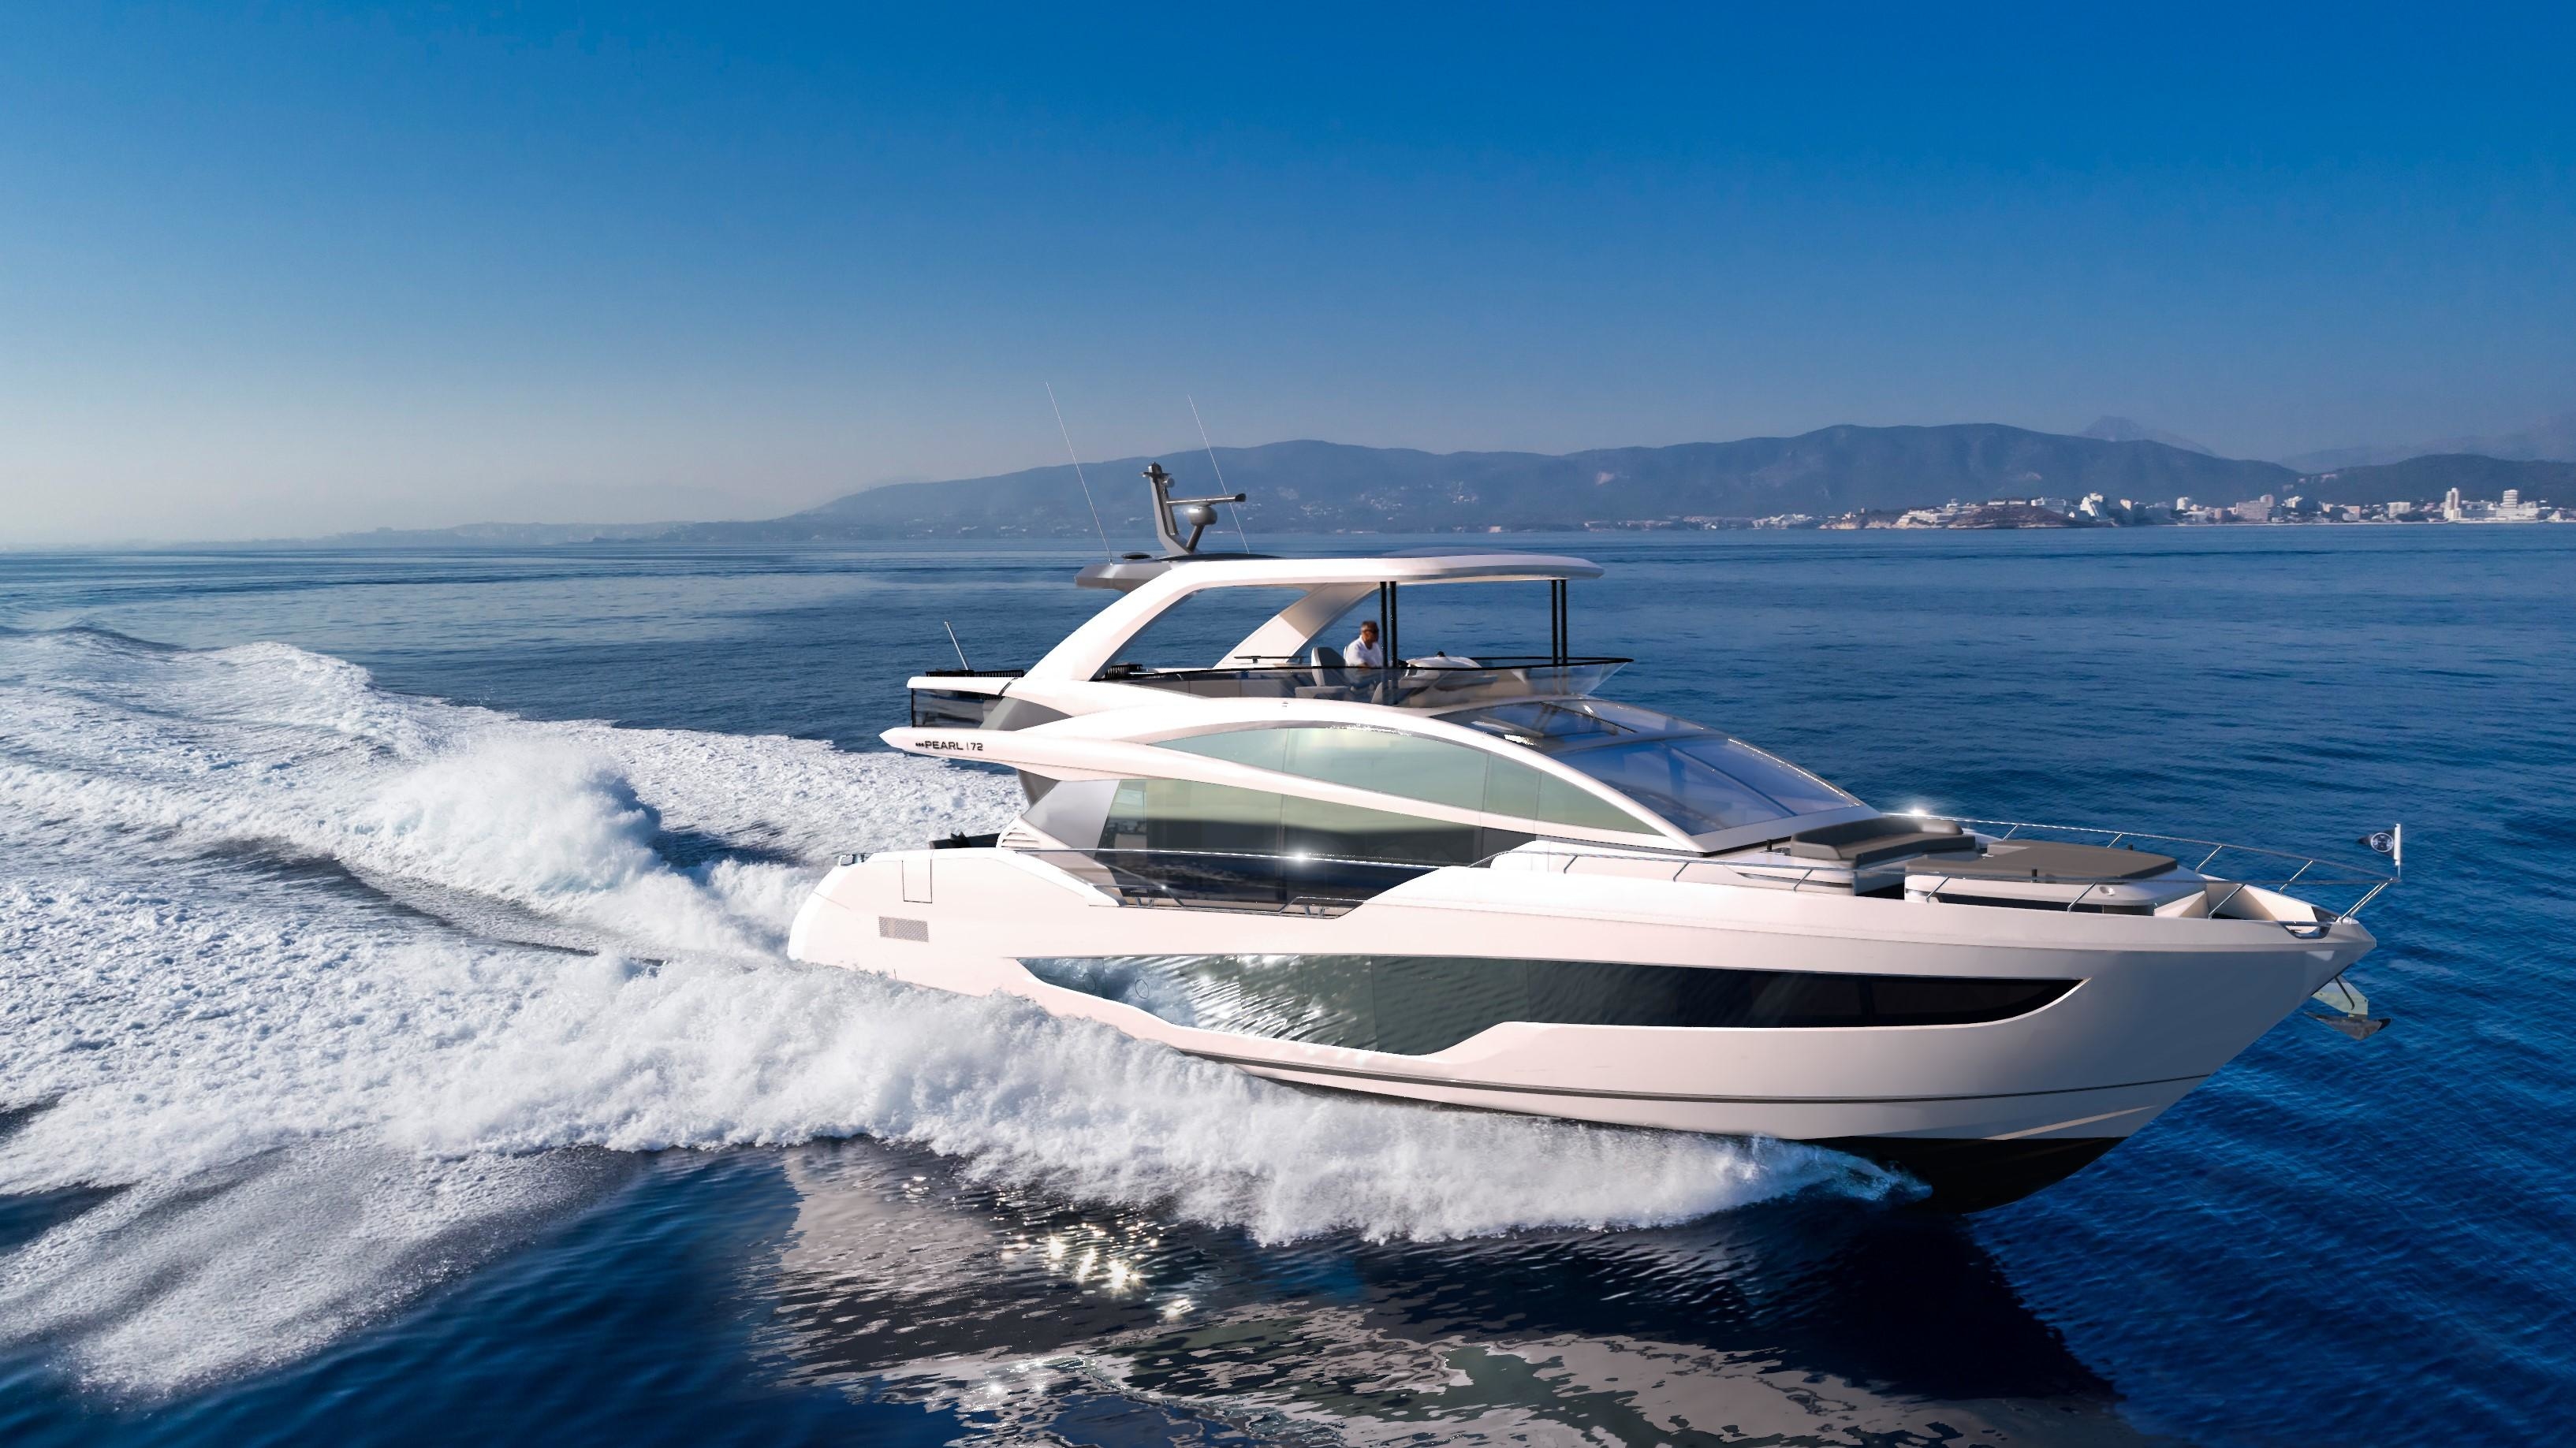 Pearl 72 Yacht Review - Power & Motoryacht